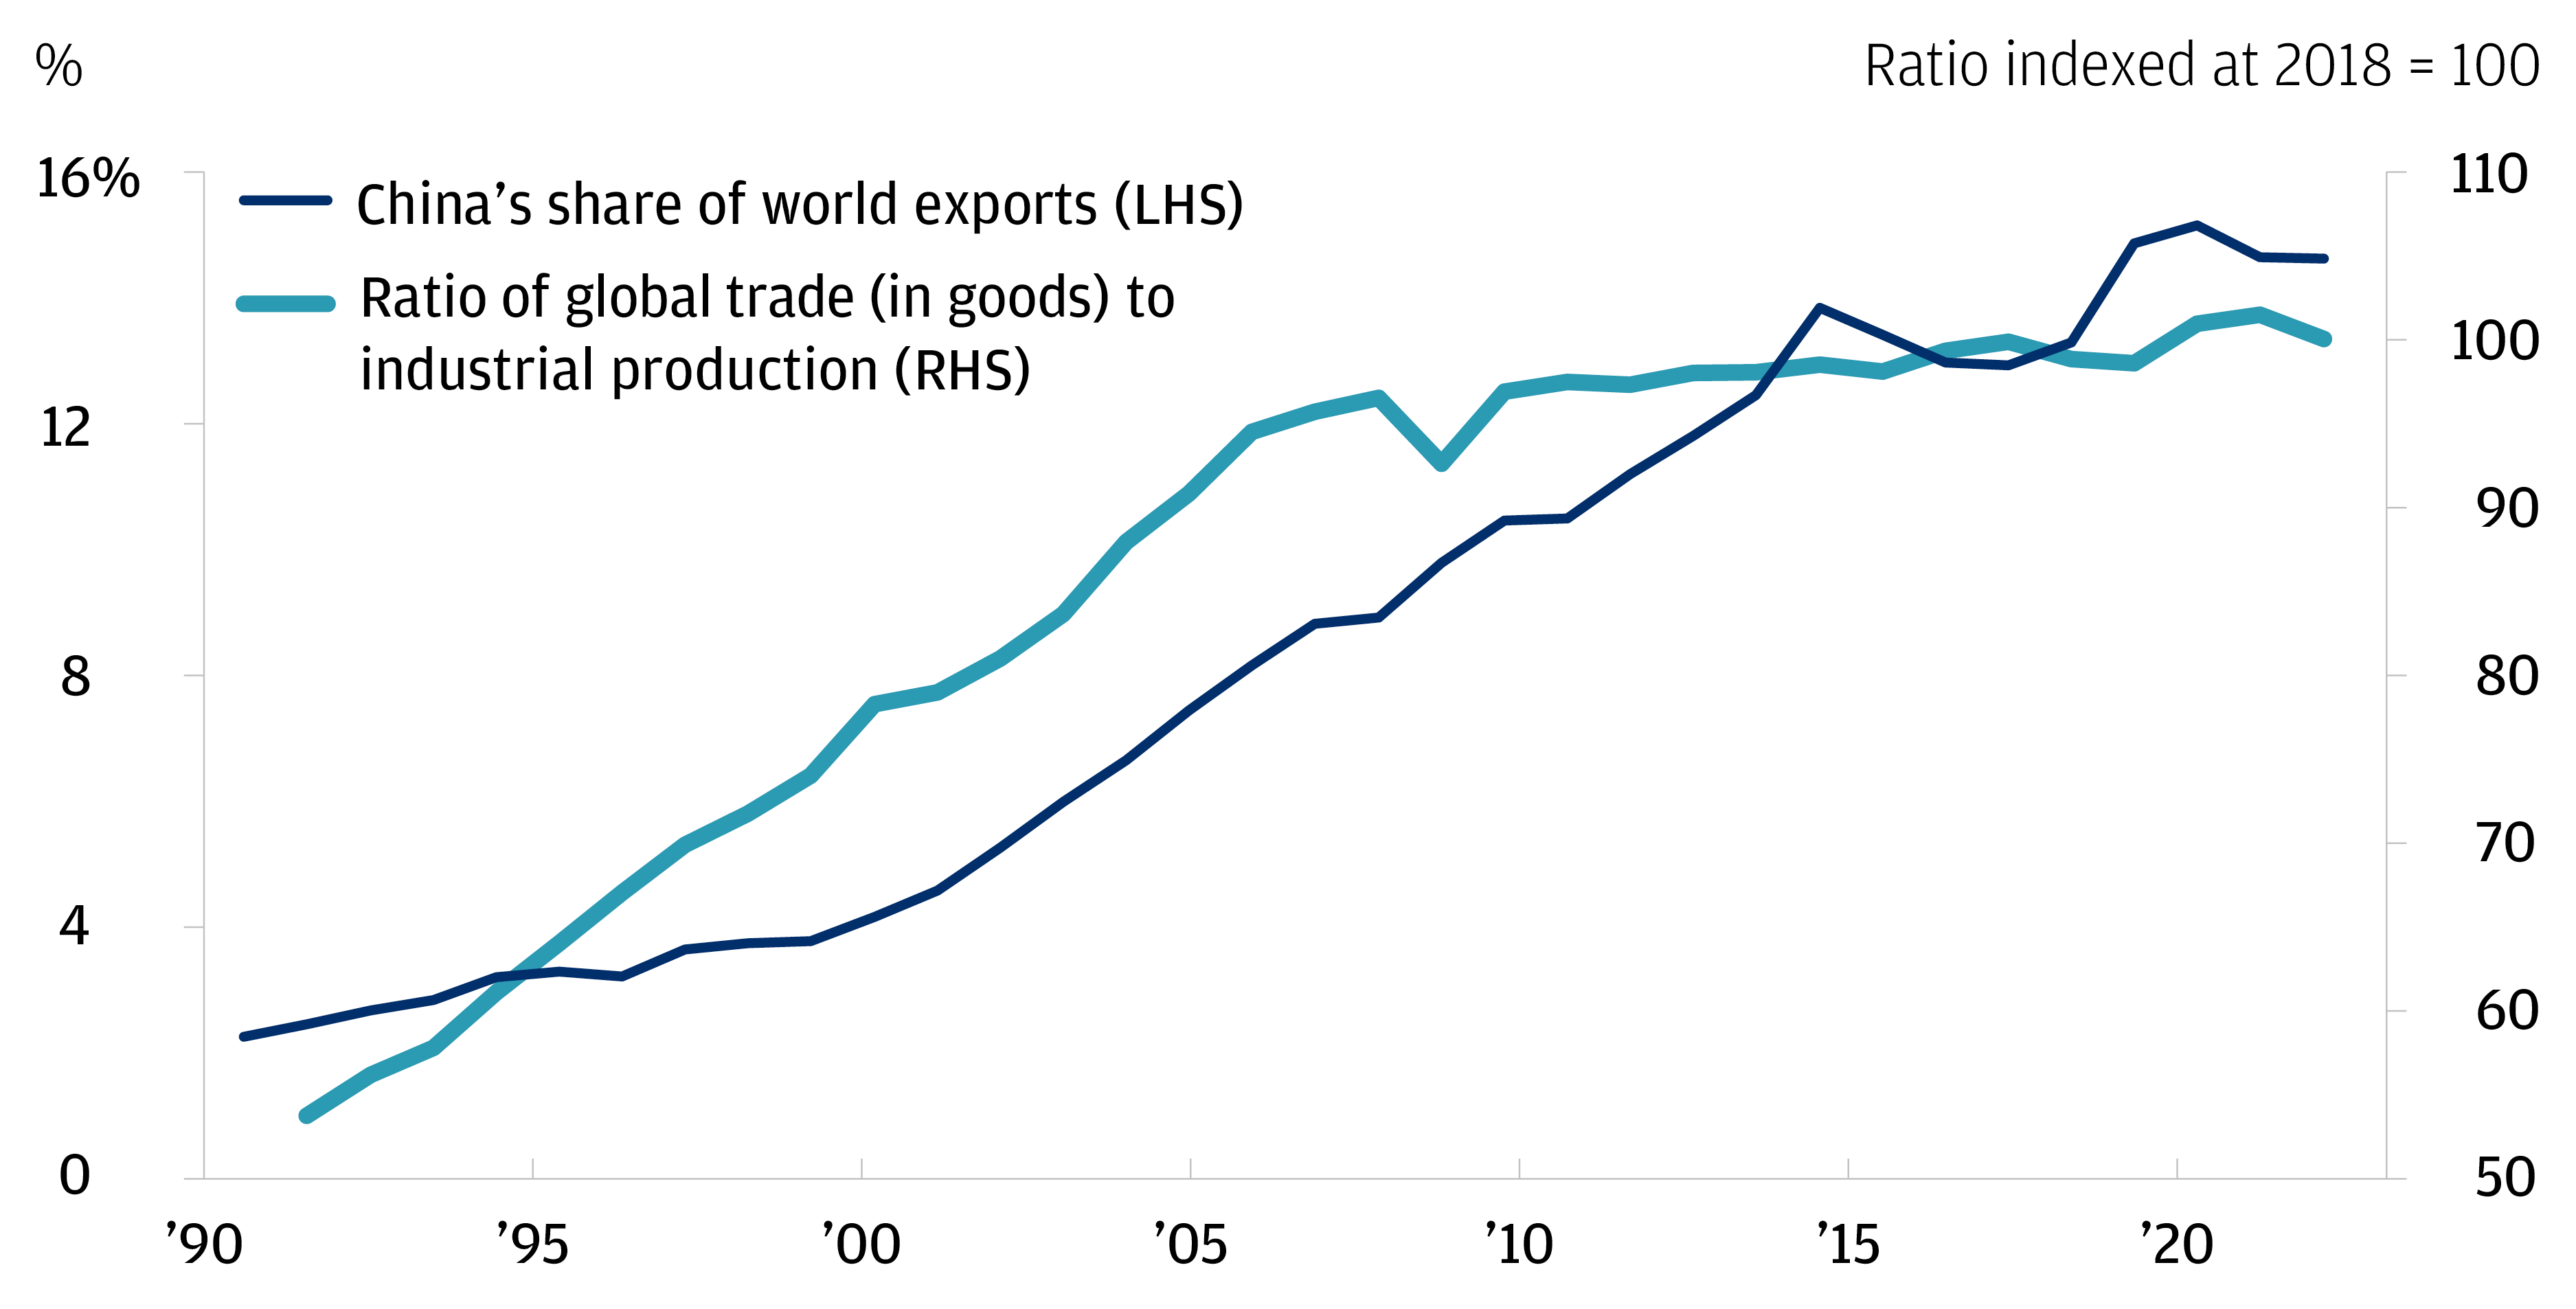 The chart describes China’s share of world exports and ratio of global trade (in goods) to industrial production on dual axis. 